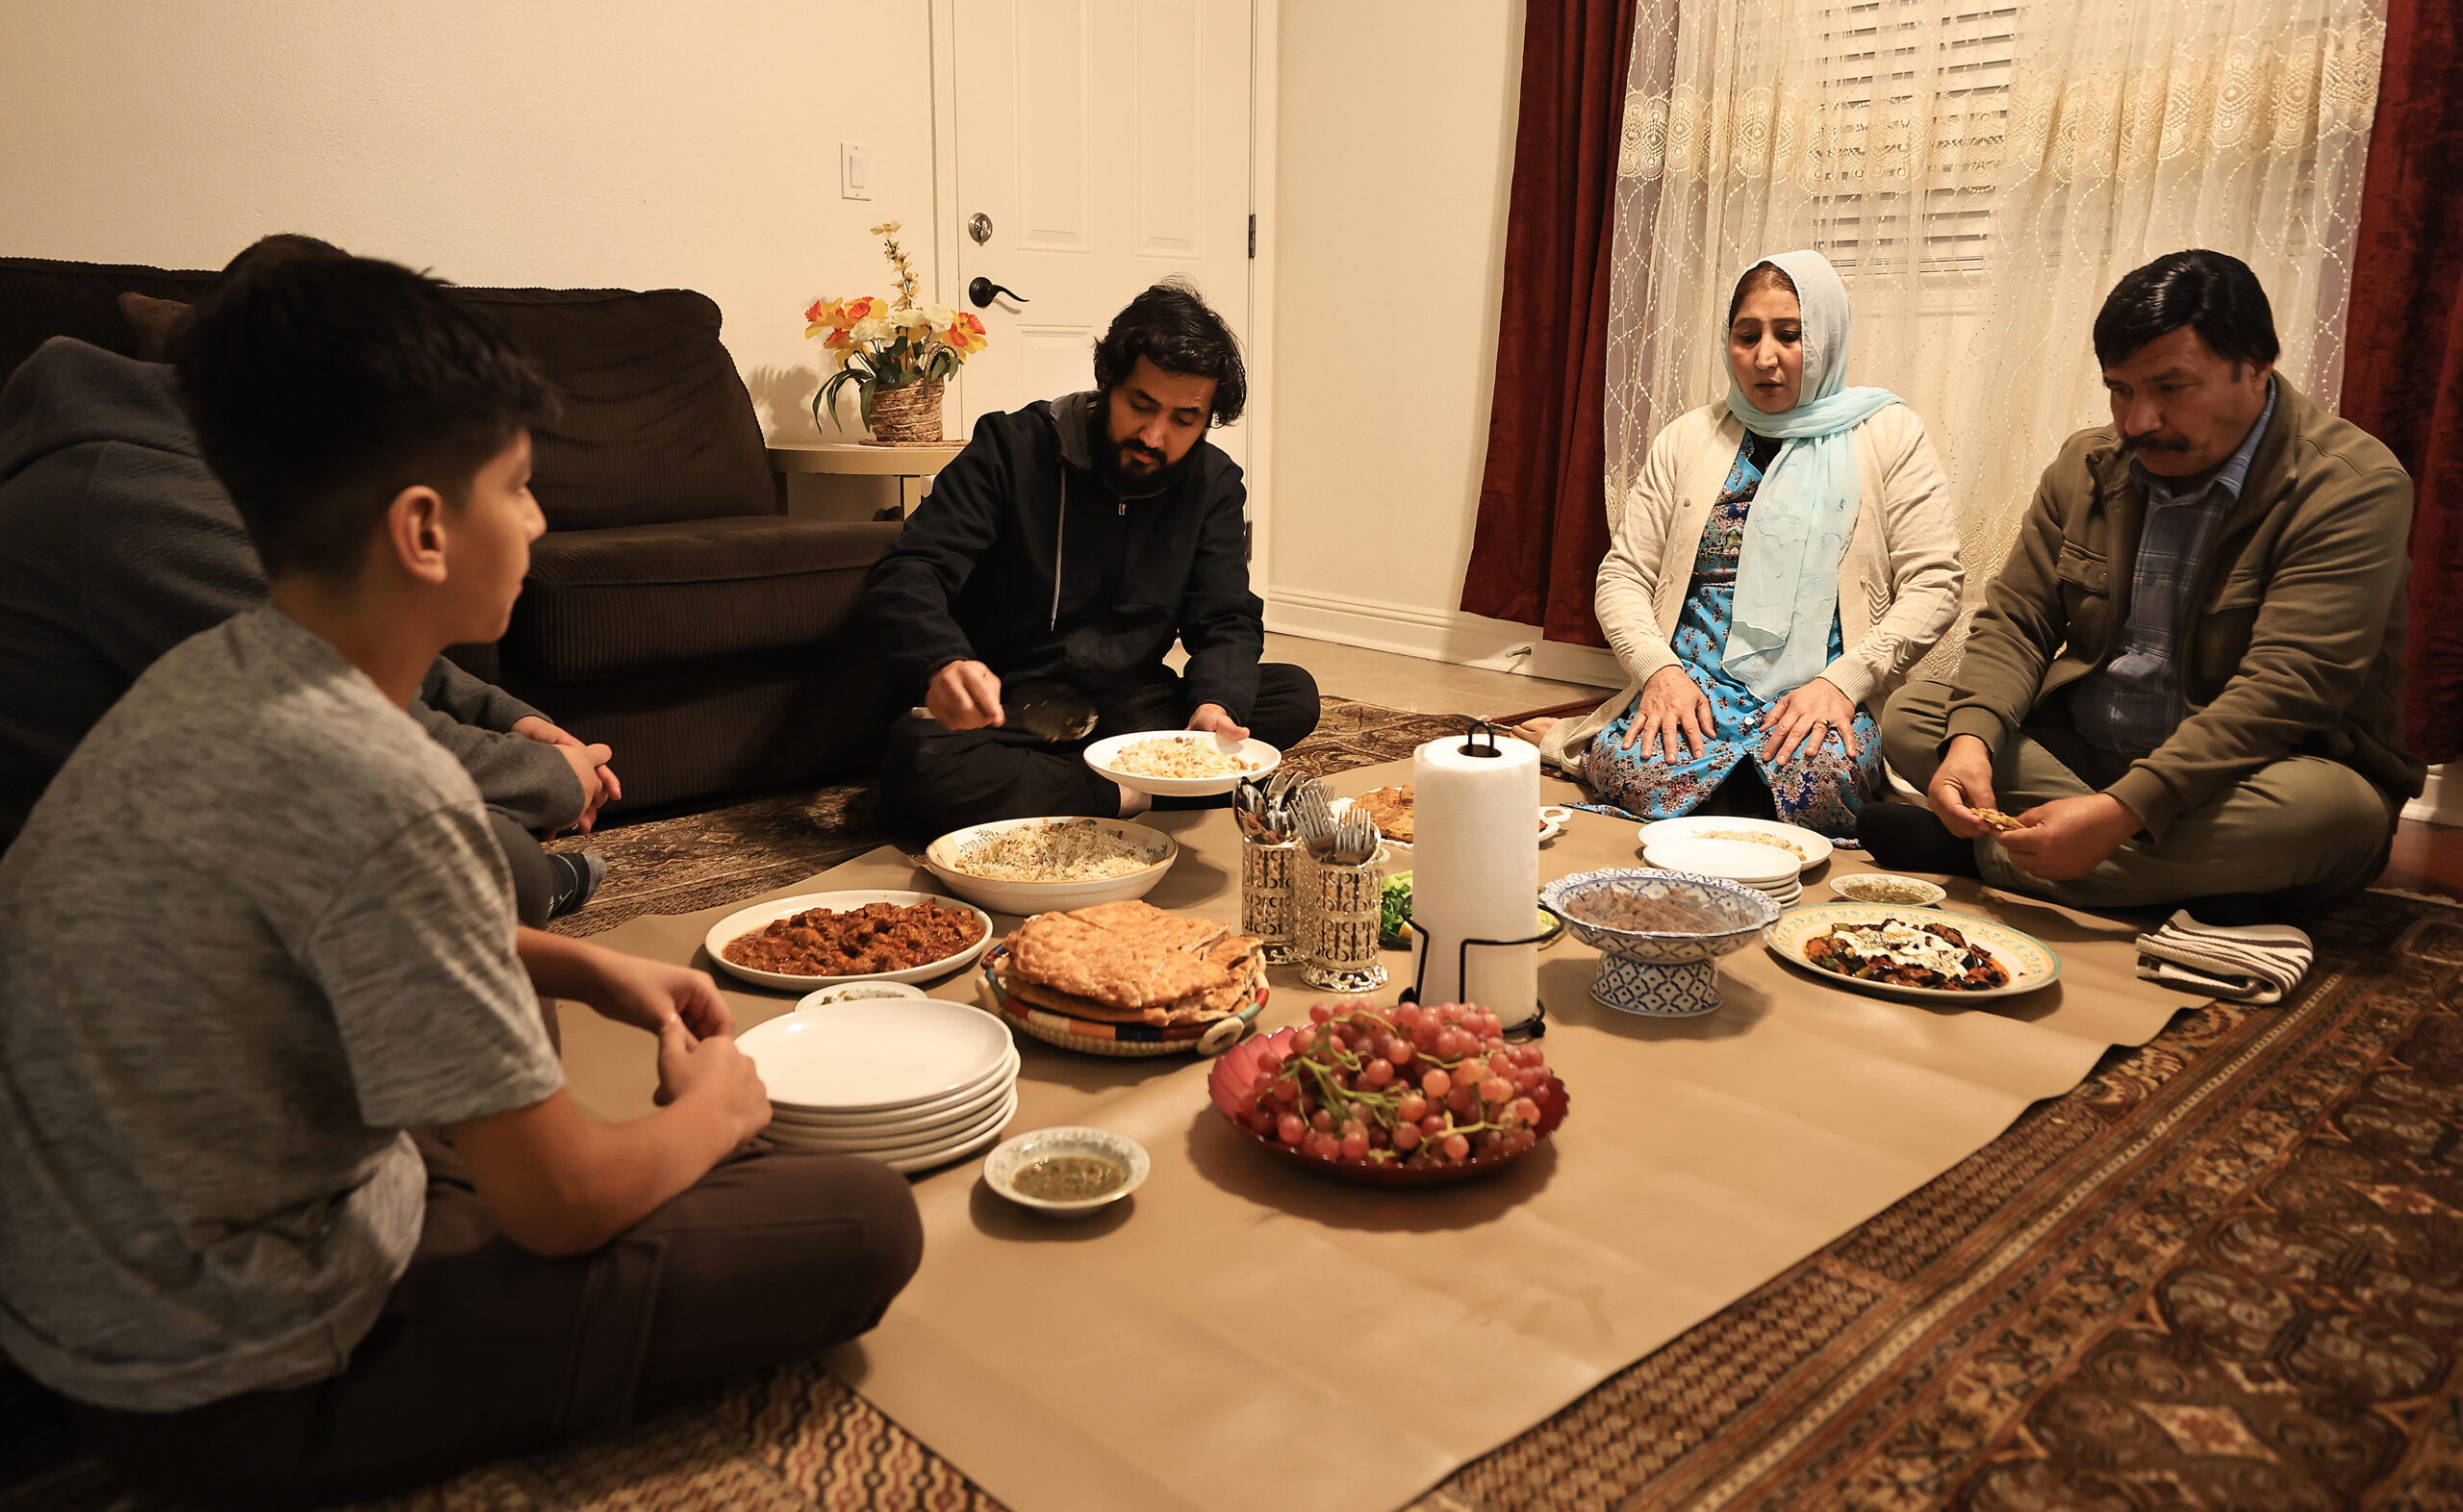 Roman Zimari, middle, joins his family for a traditional evening meal, Wednesday, Nov. 16, 2022 at their apartment in Santa Rosa. (Kent Porter / The Press Democrat) 2022